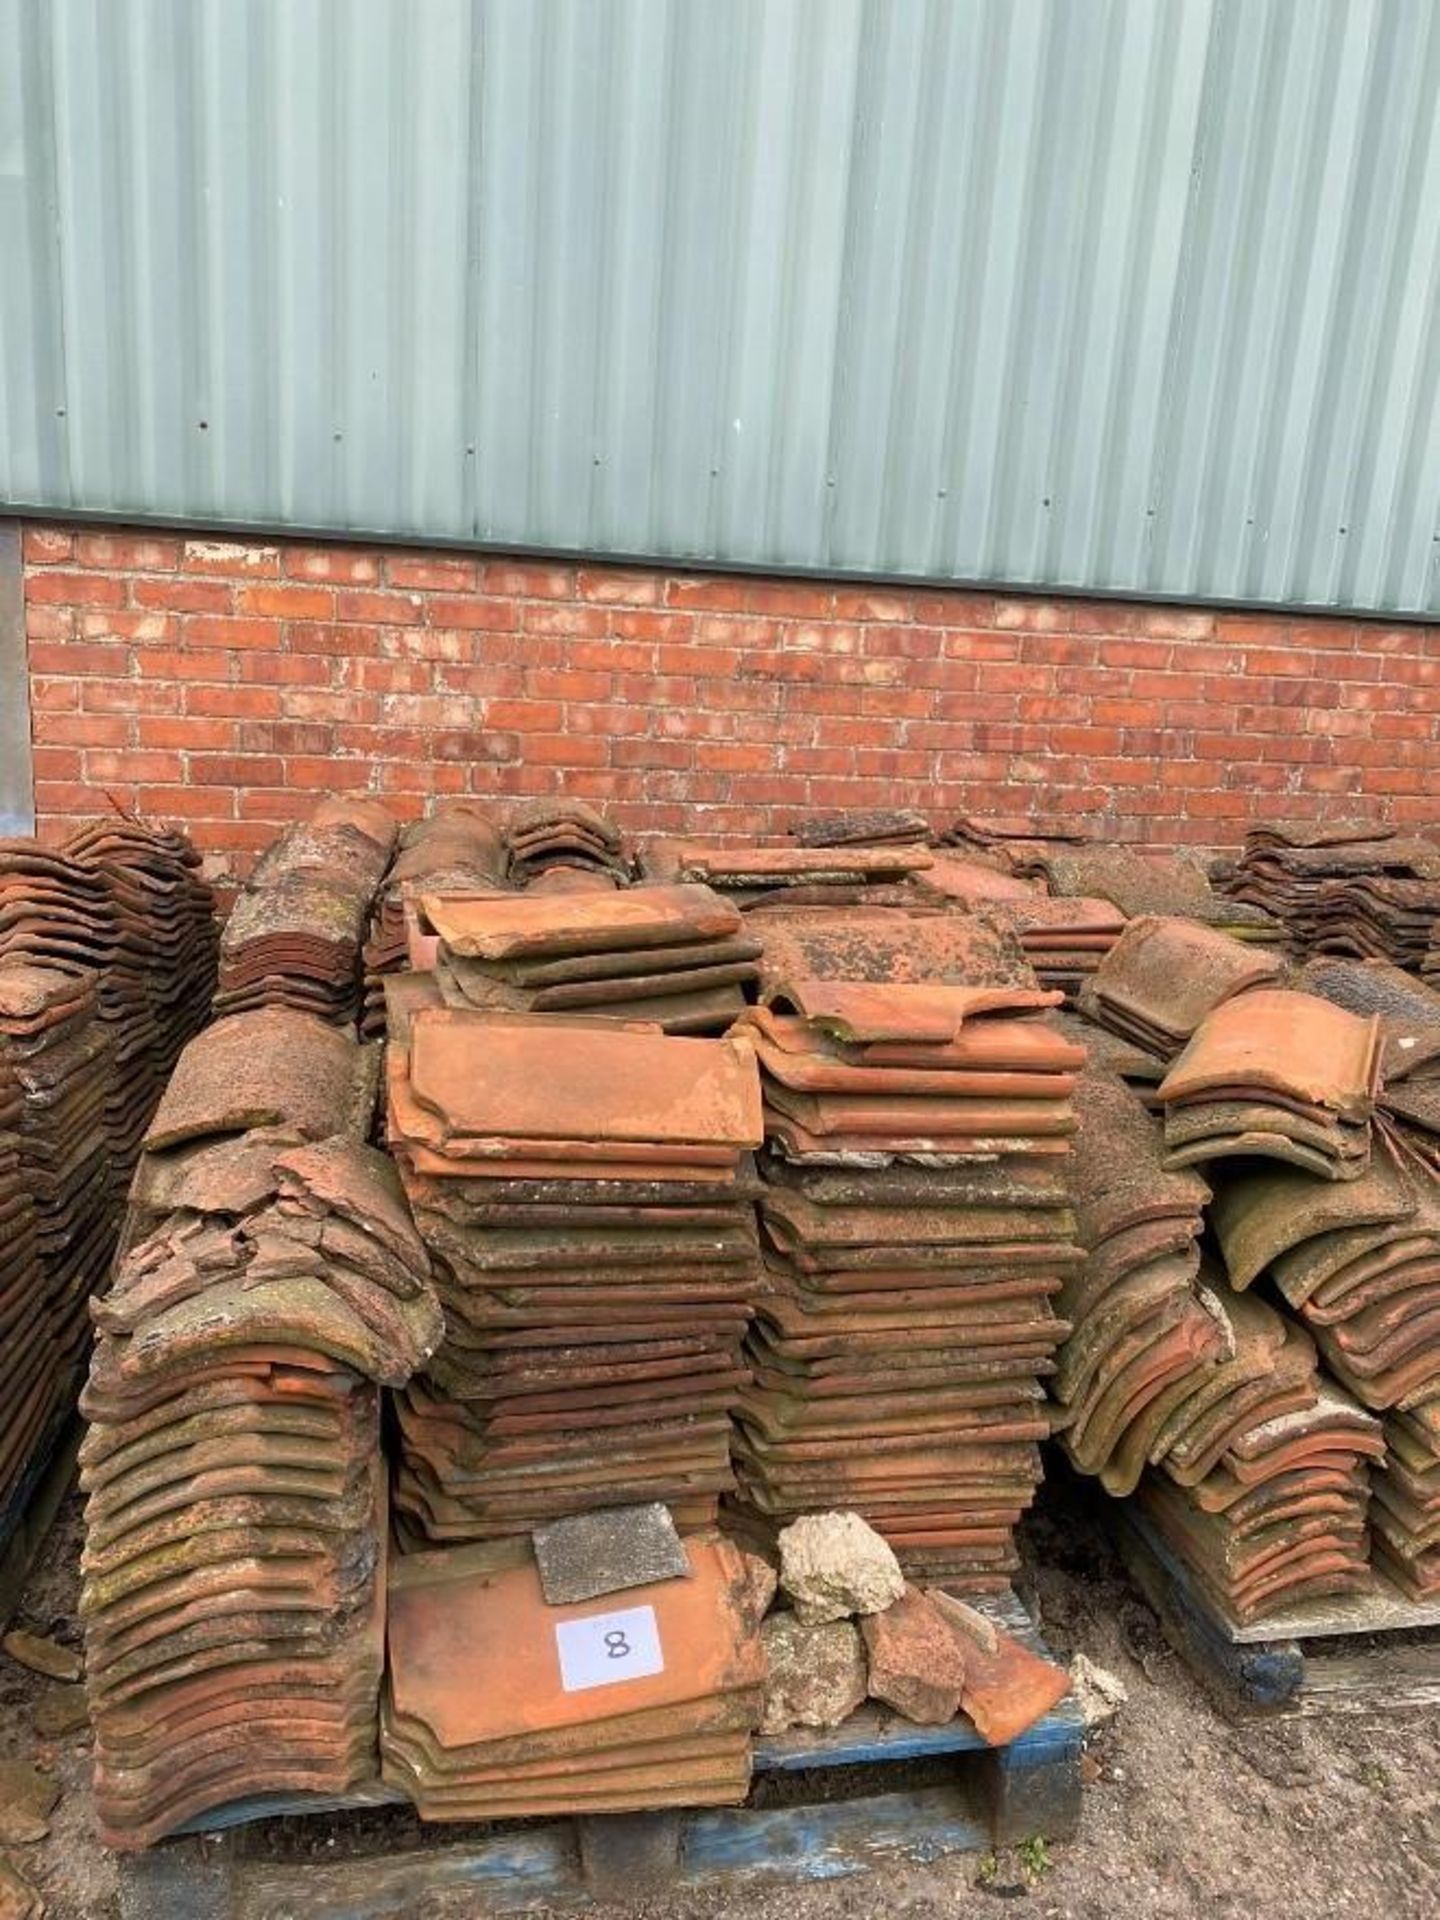 11No. Pallets Of Roofing Tiles - (Lincolnshire)